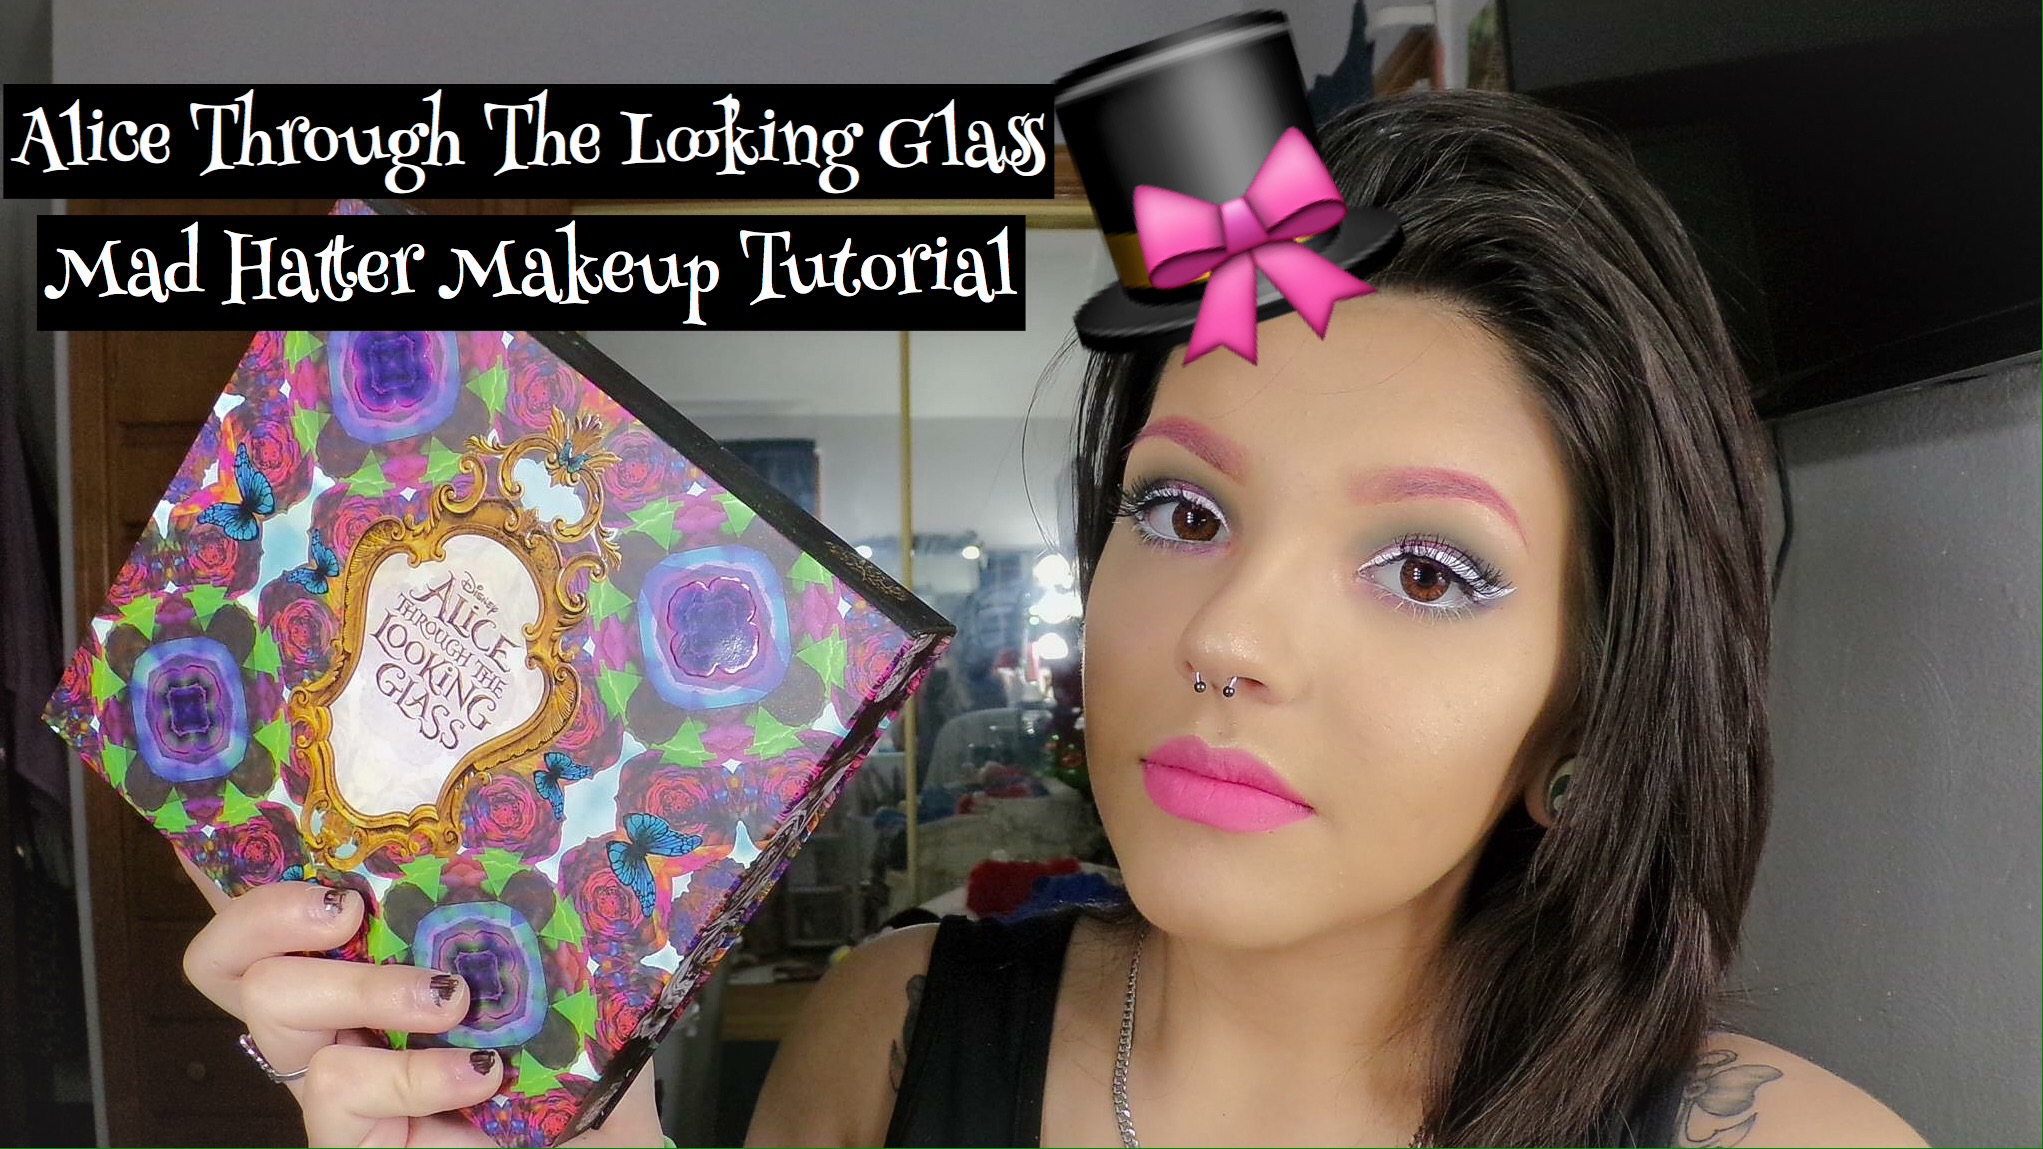 Mad Hatter Eye Makeup Alice Through The Looking Glass Makeup Tutorial Mad Hatter